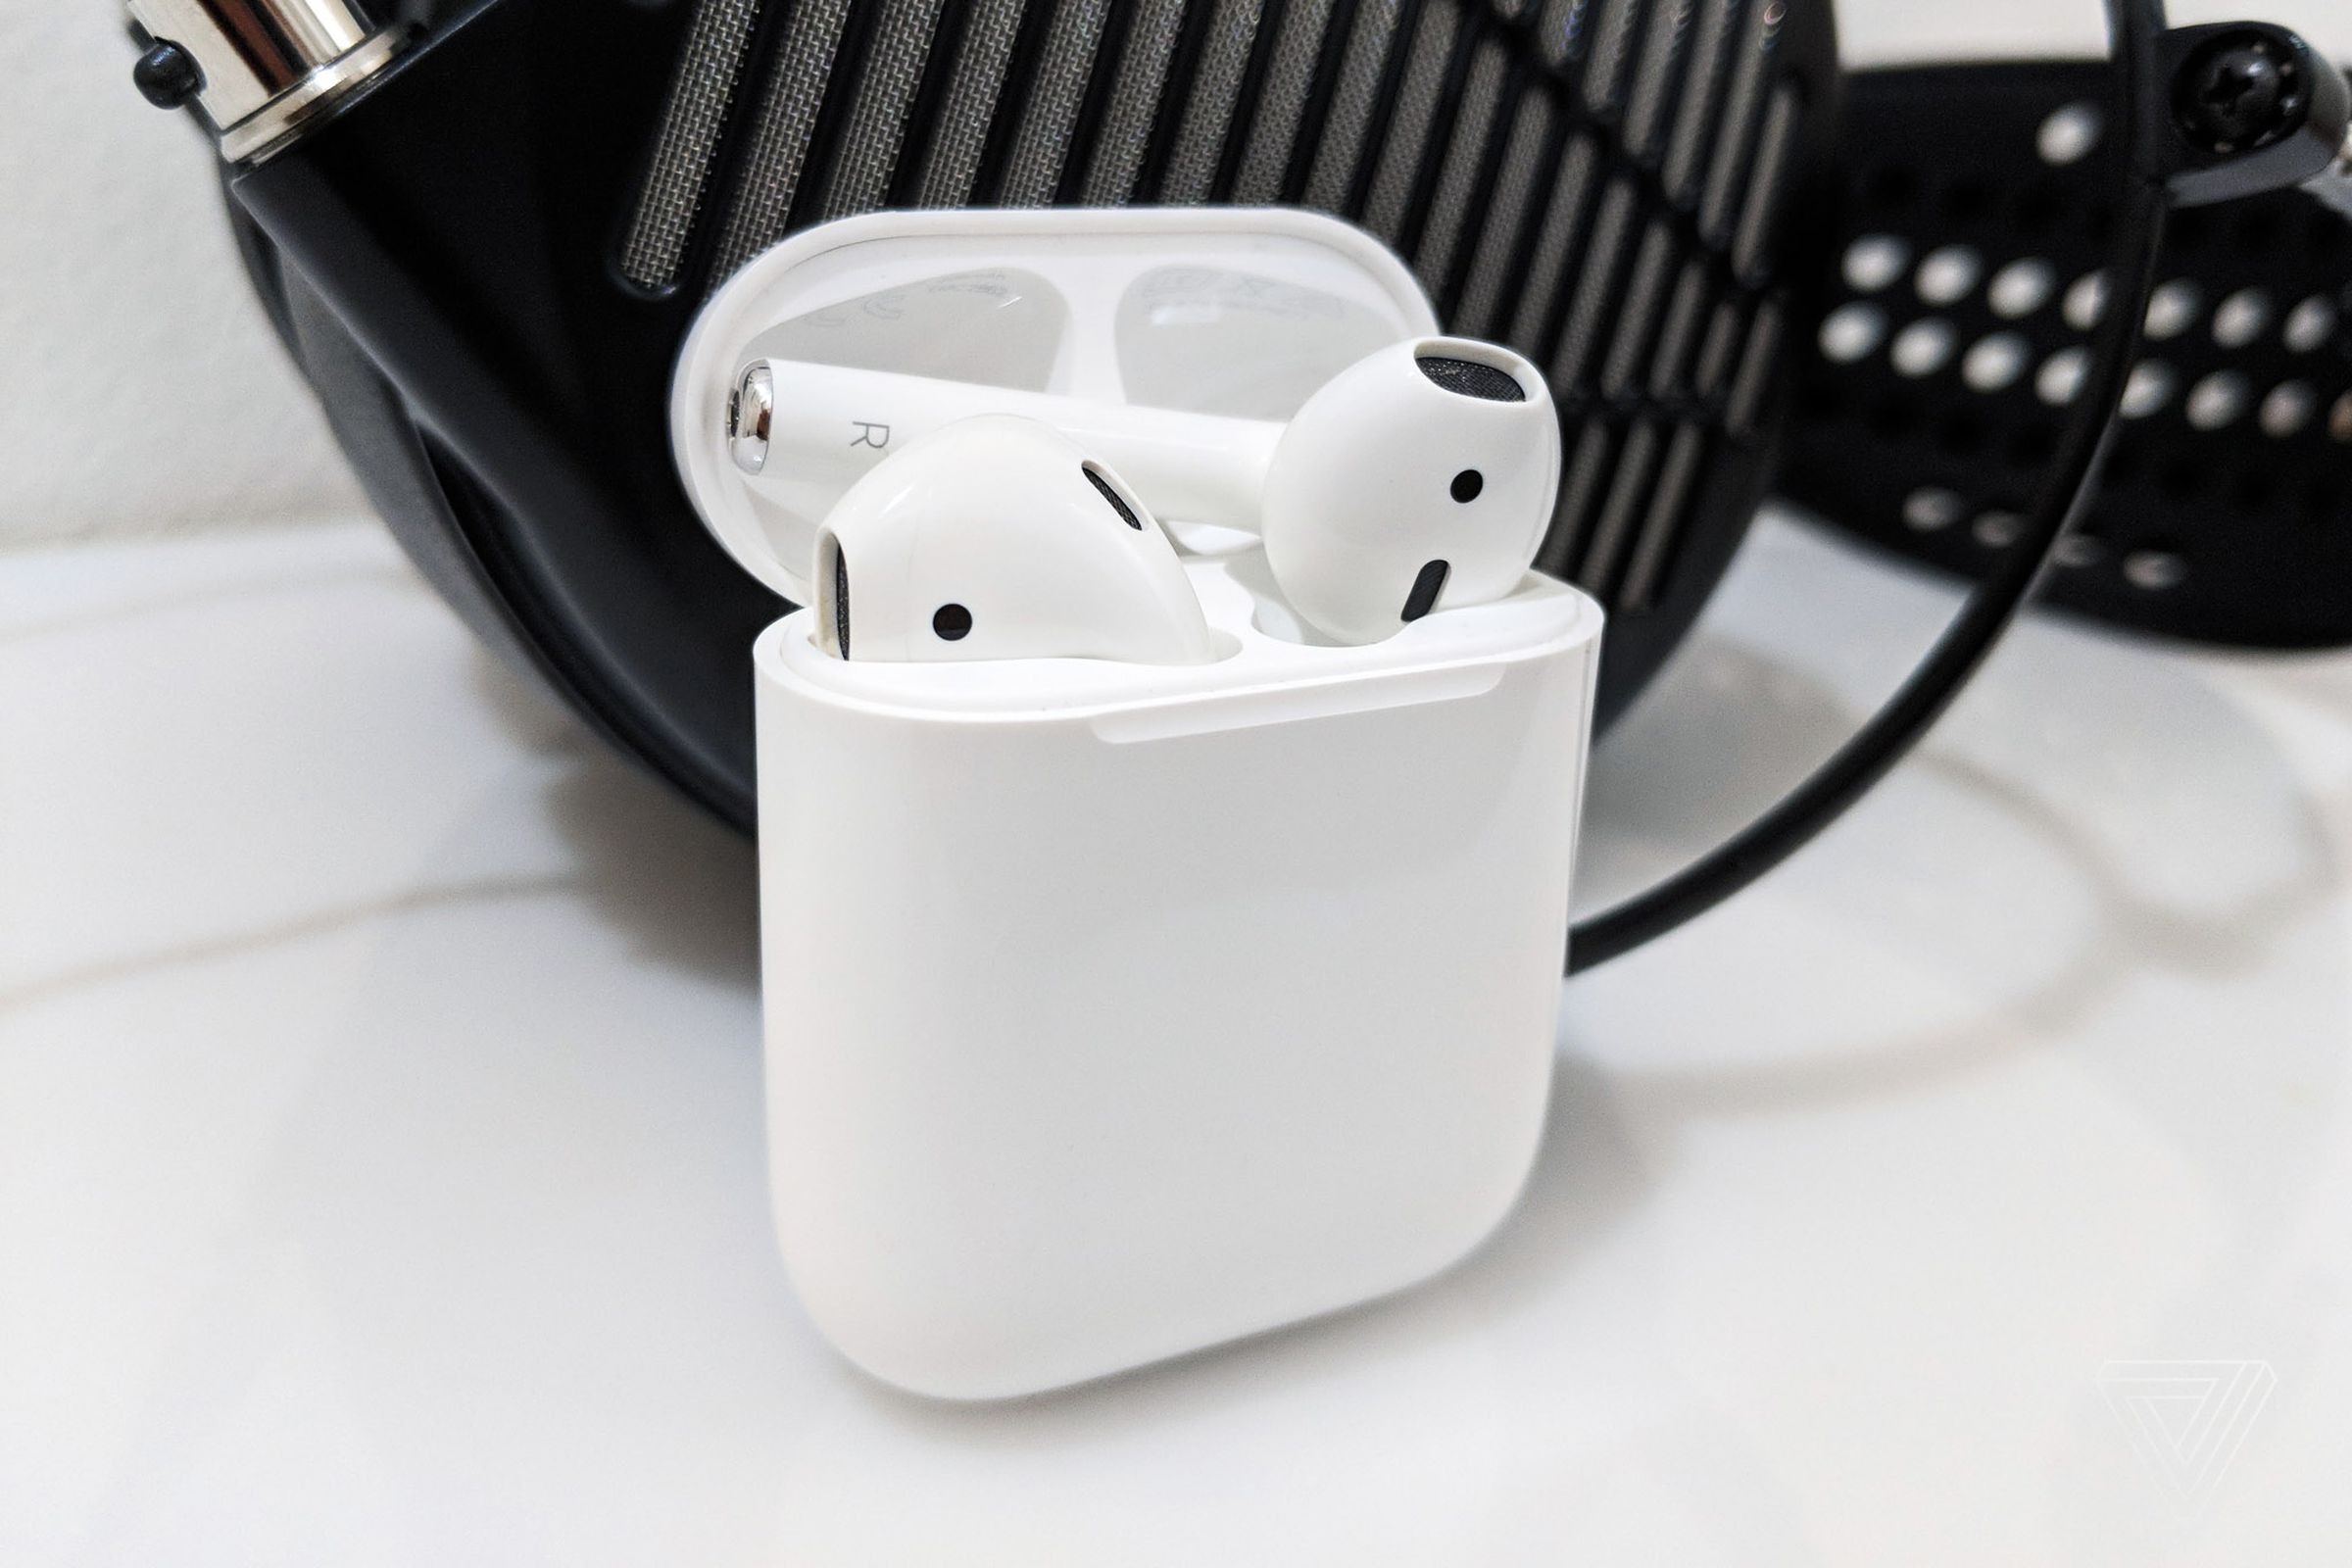 Apple AirPods in front of Audeze MX4